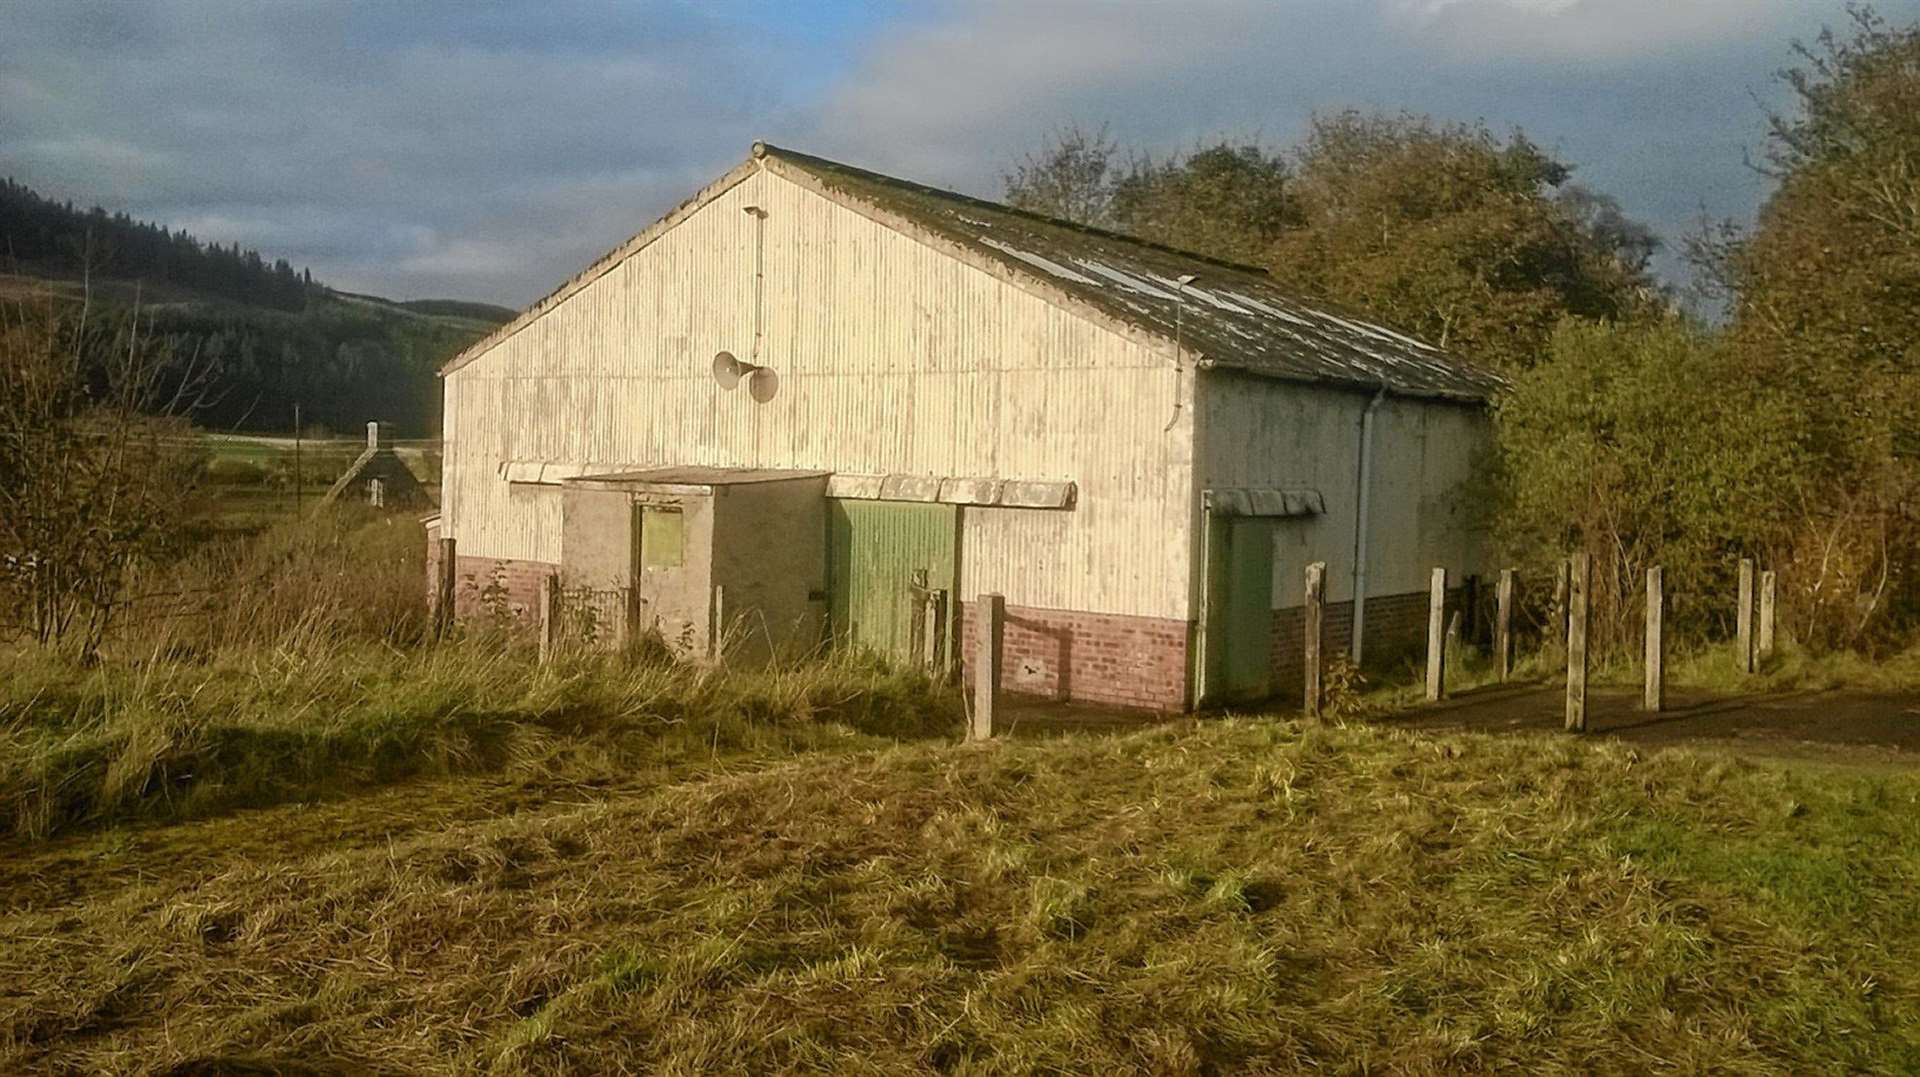 The historic auction mart before it was refurbished.